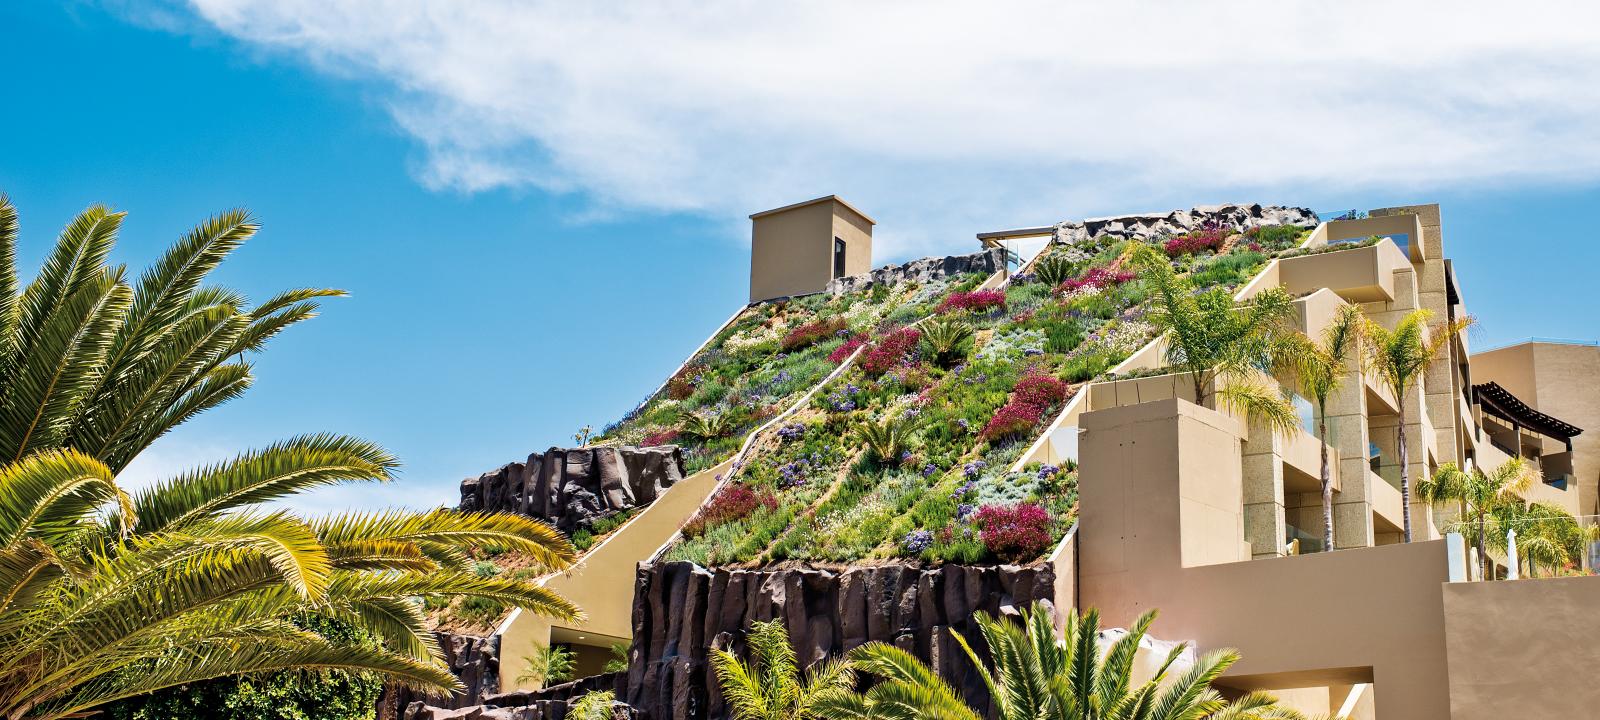 Steep pitched green roof with colourful vegetation